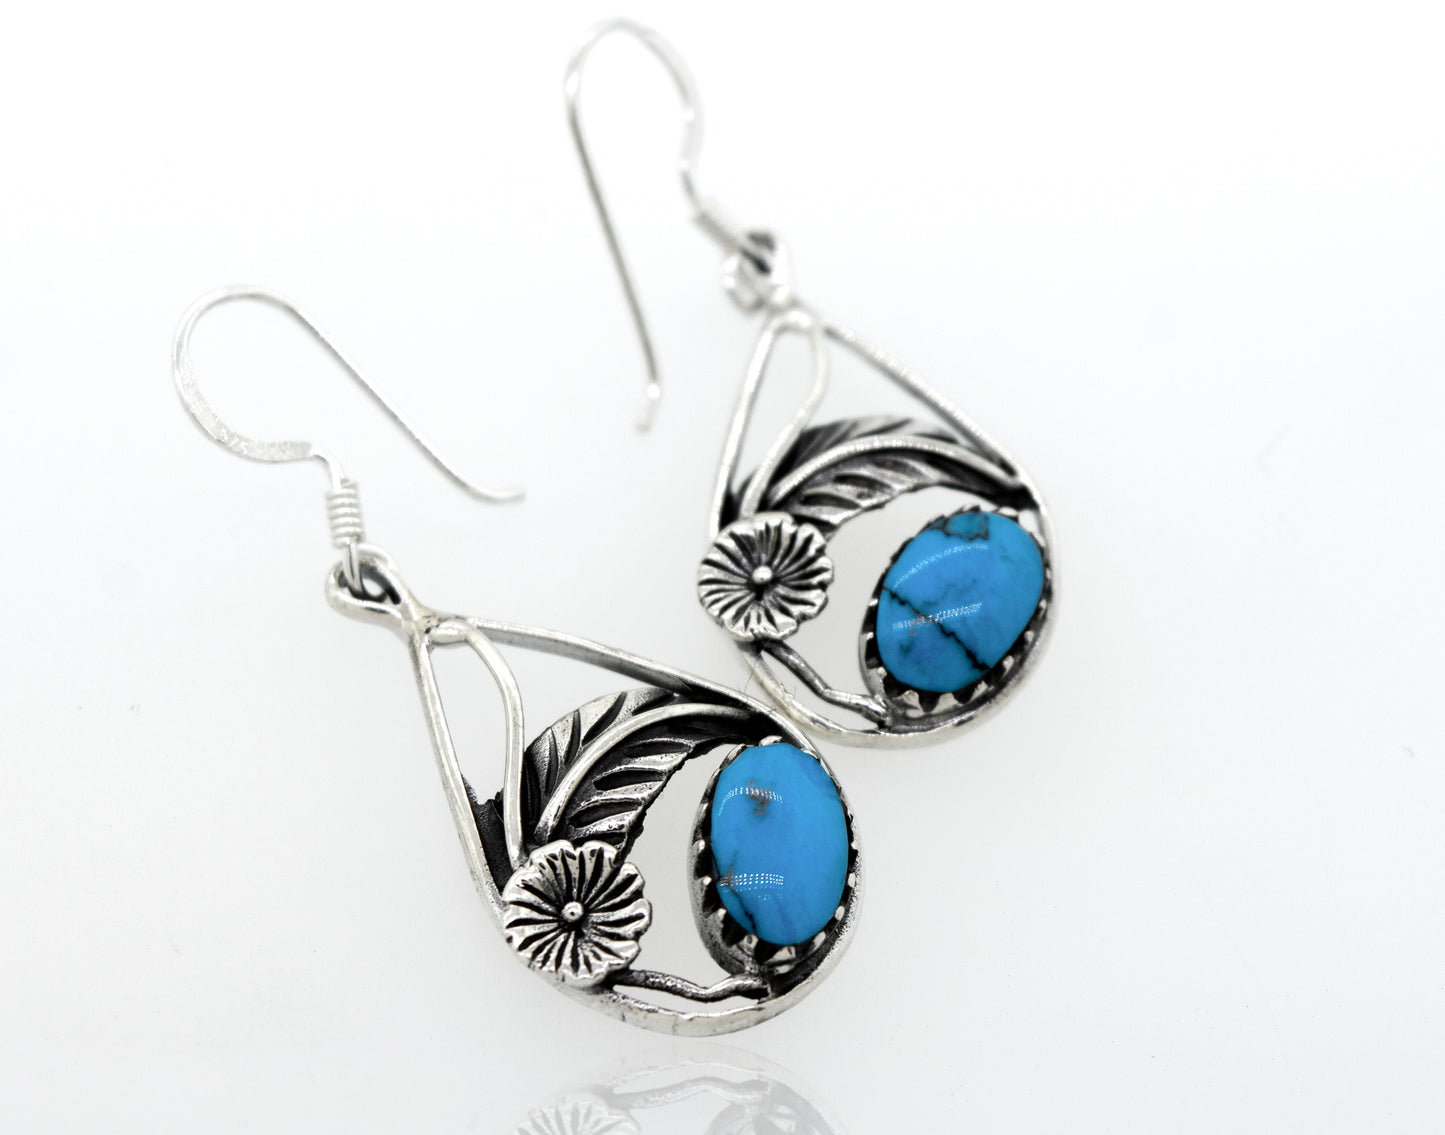 Blue Turquoise Teardrop Earrings with Floral Setting by Super Silver.